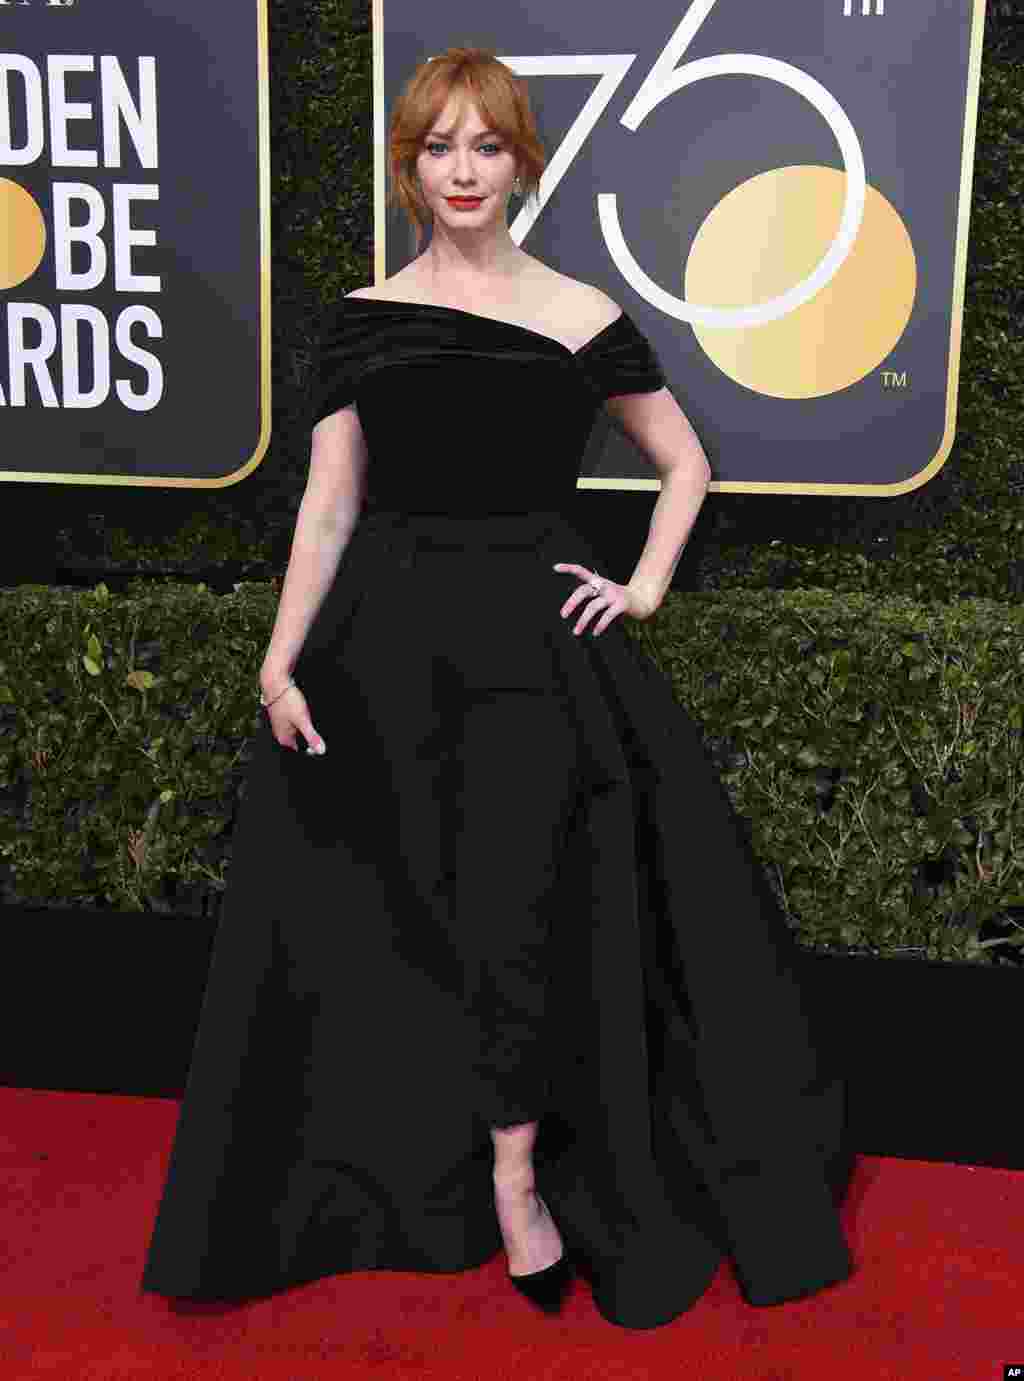 Christina Hendricks arrives at the 75th annual Golden Globe Awards at the Beverly Hilton Hotel on Sunday, Jan. 7, 2018, in Beverly Hills, Calif. (Photo by Jordan Strauss/Invision/AP)